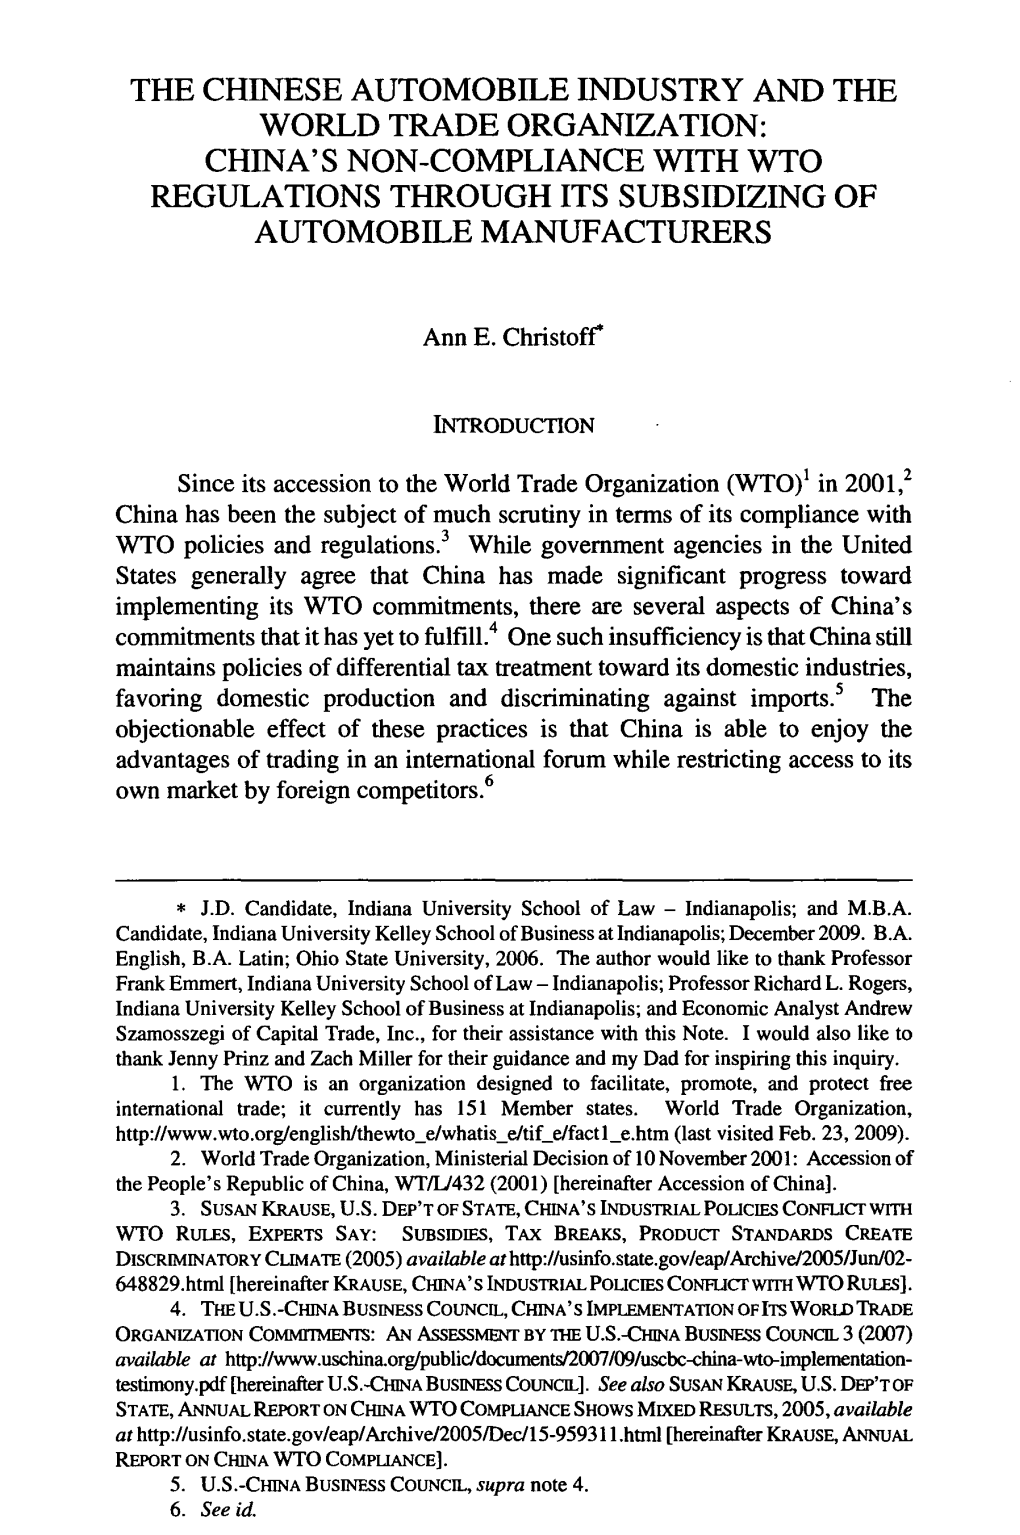 Chinese Automobile Industry and the World Trade Organization: China's Non-Compliance with Wto Regulations Through Its Subsidizing of Automobile Manufacturers